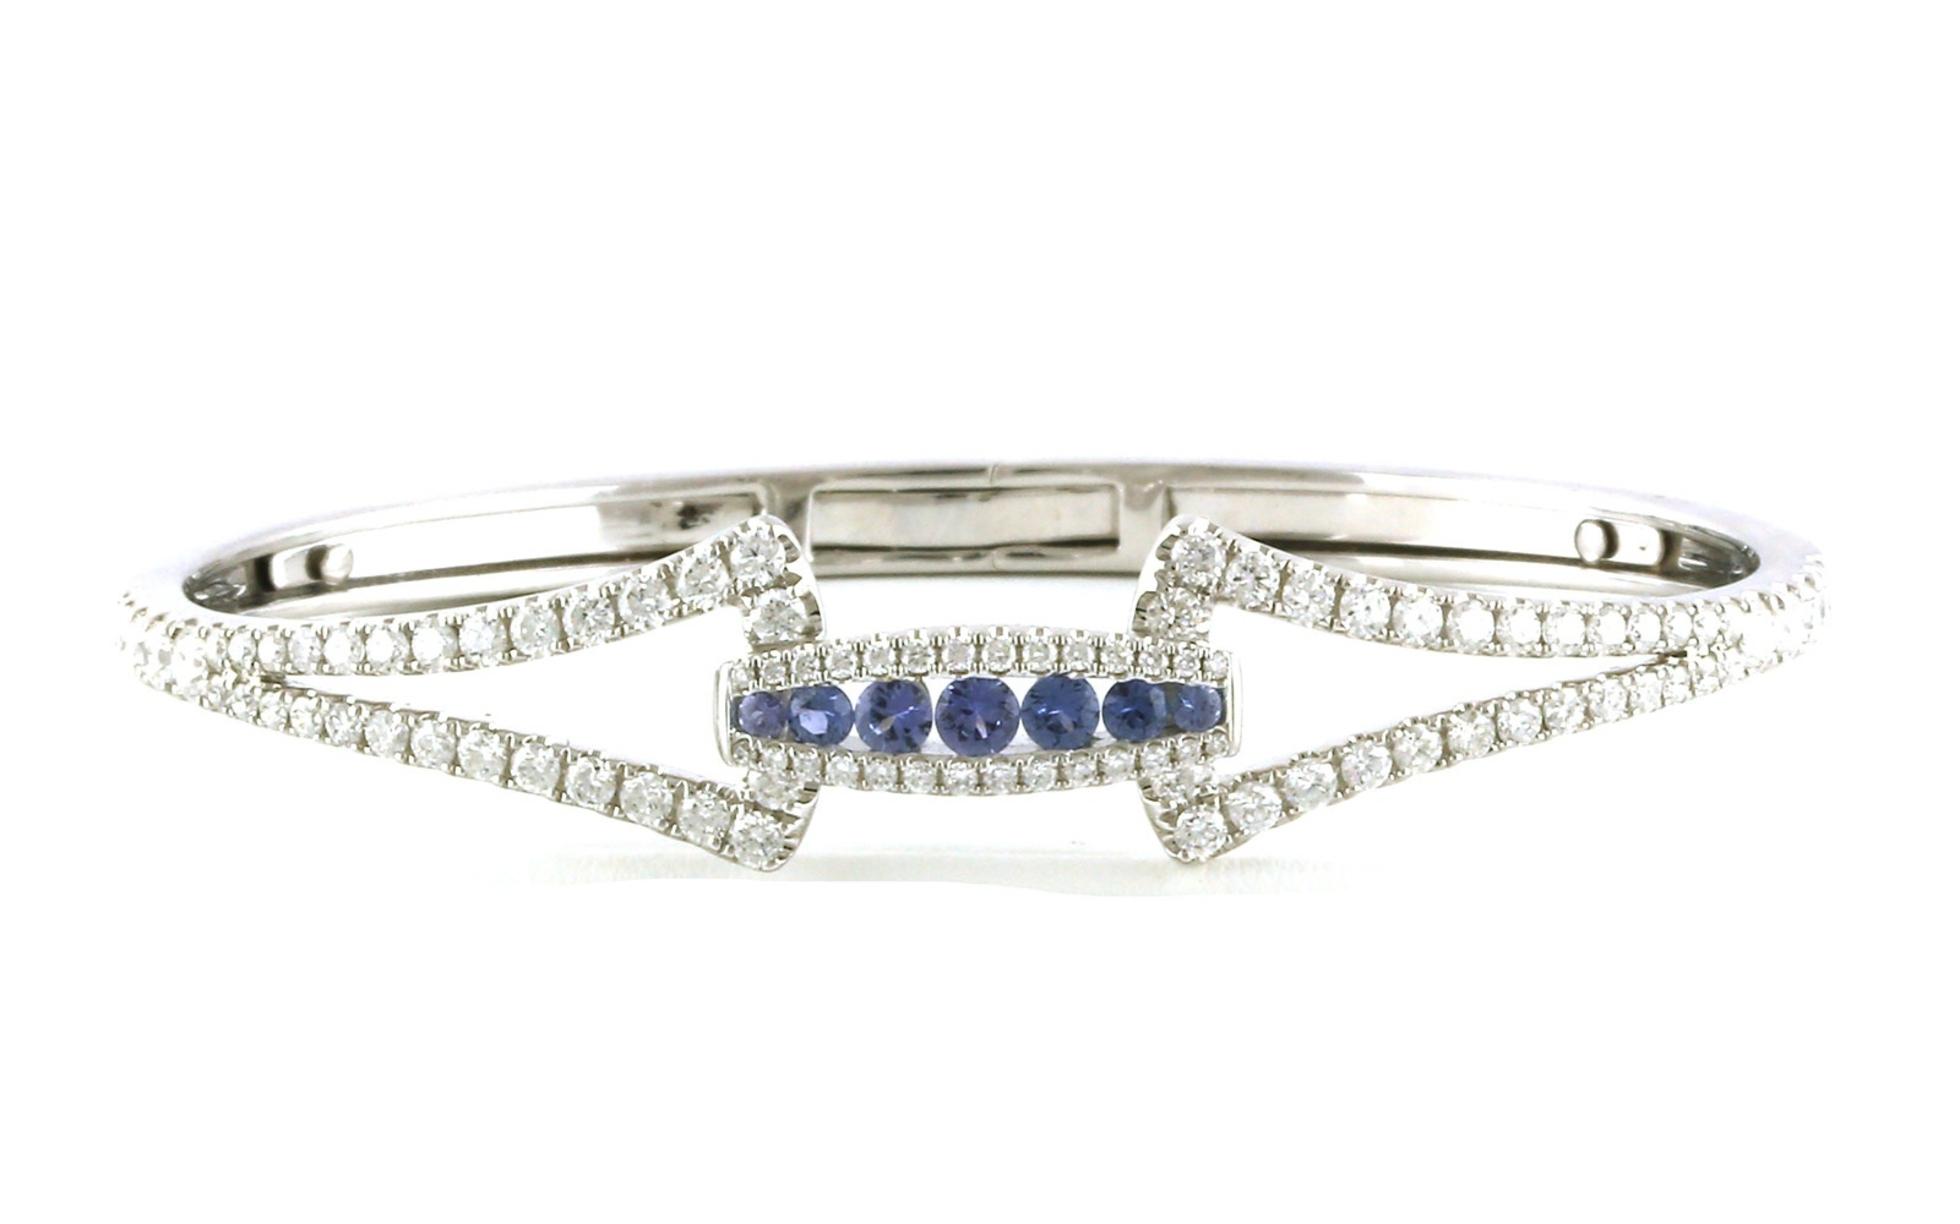 Graduated Channel-set Montana Yogo Sapphire and Diamond Bangle Bracelet in White Gold (2.37cts TWT)